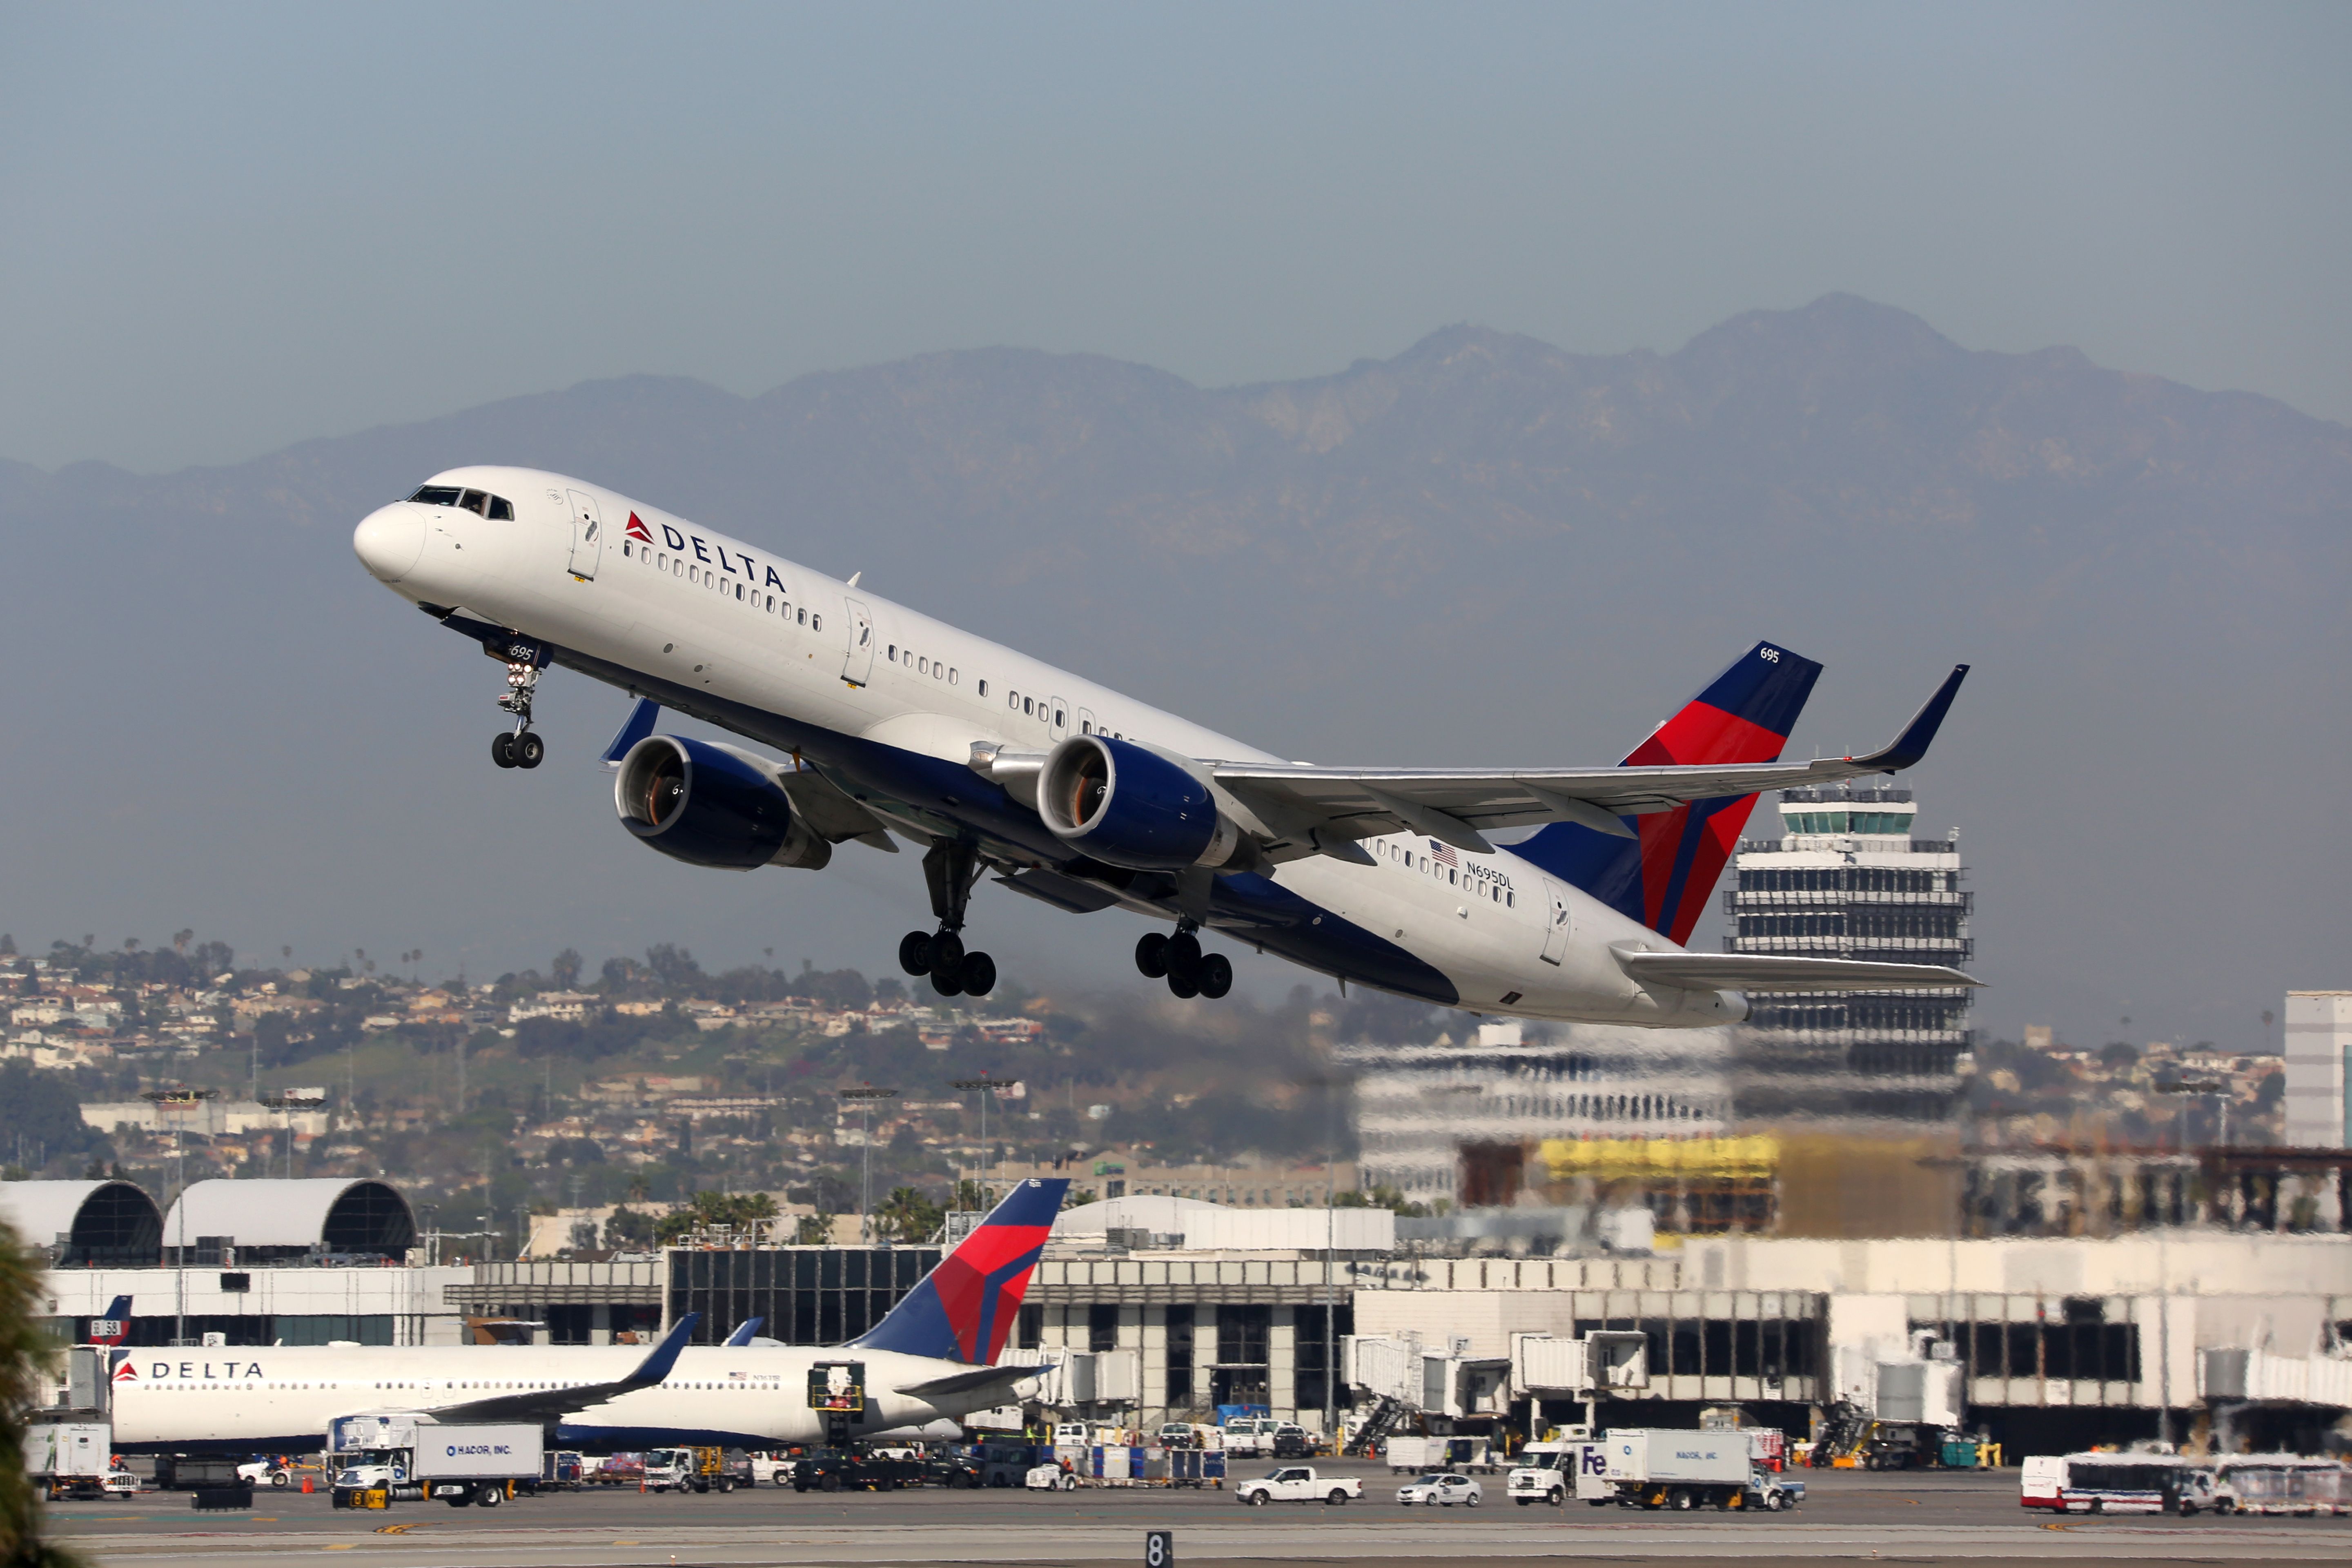 A Delta Air Lines Boeing 757-200 taking off.